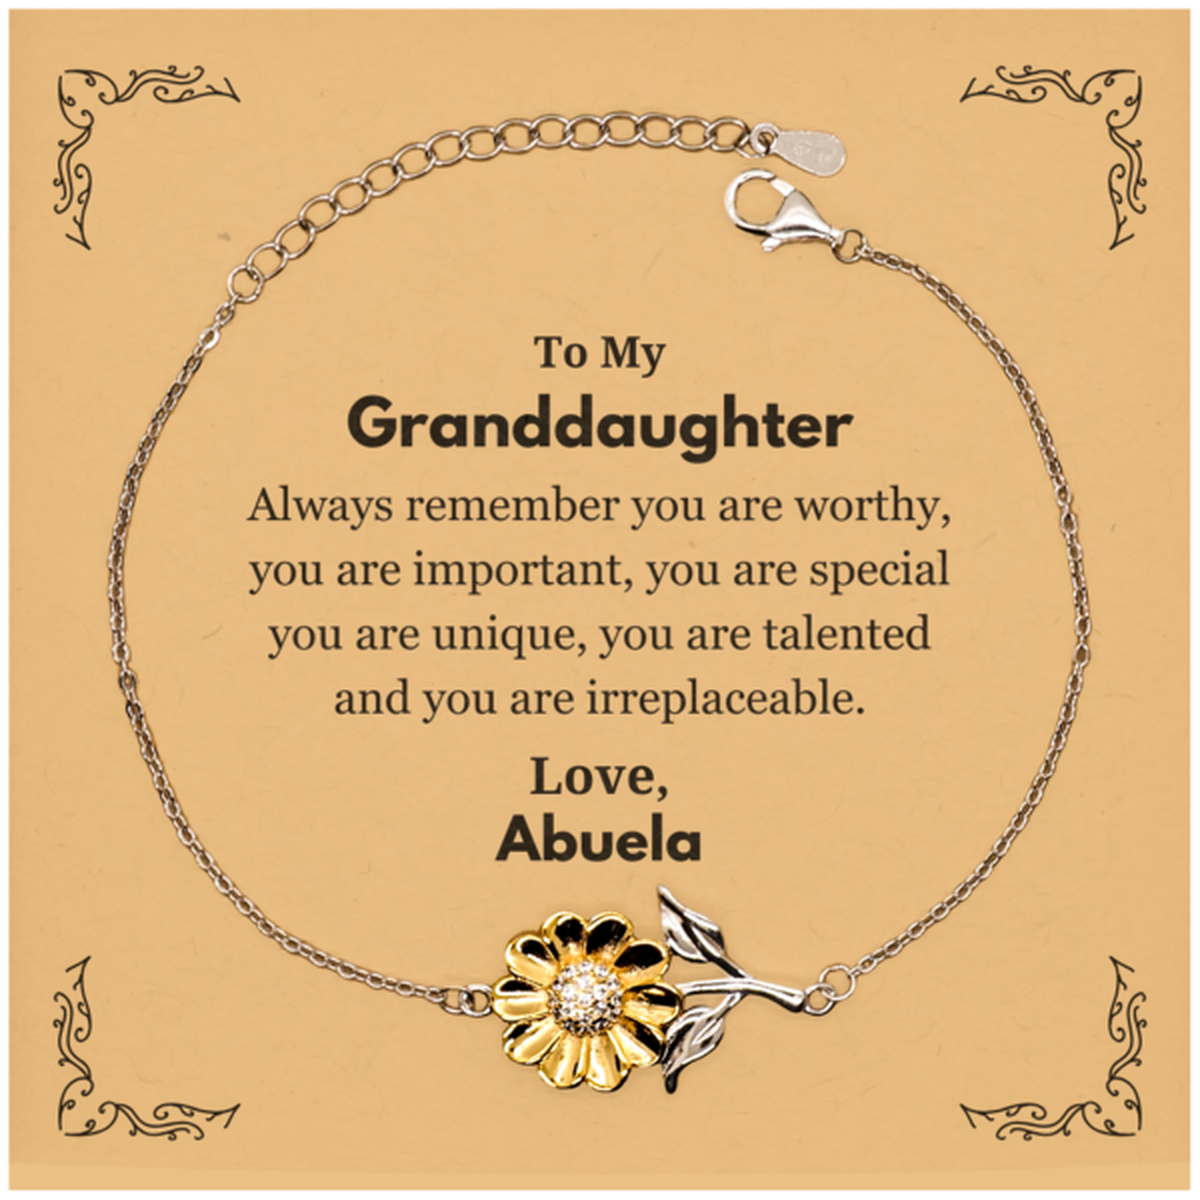 Granddaughter Birthday Gifts from Abuela, Inspirational Sunflower Bracelet for Granddaughter Christmas Graduation Gifts for Granddaughter Always remember you are worthy, you are important. Love, Abuela